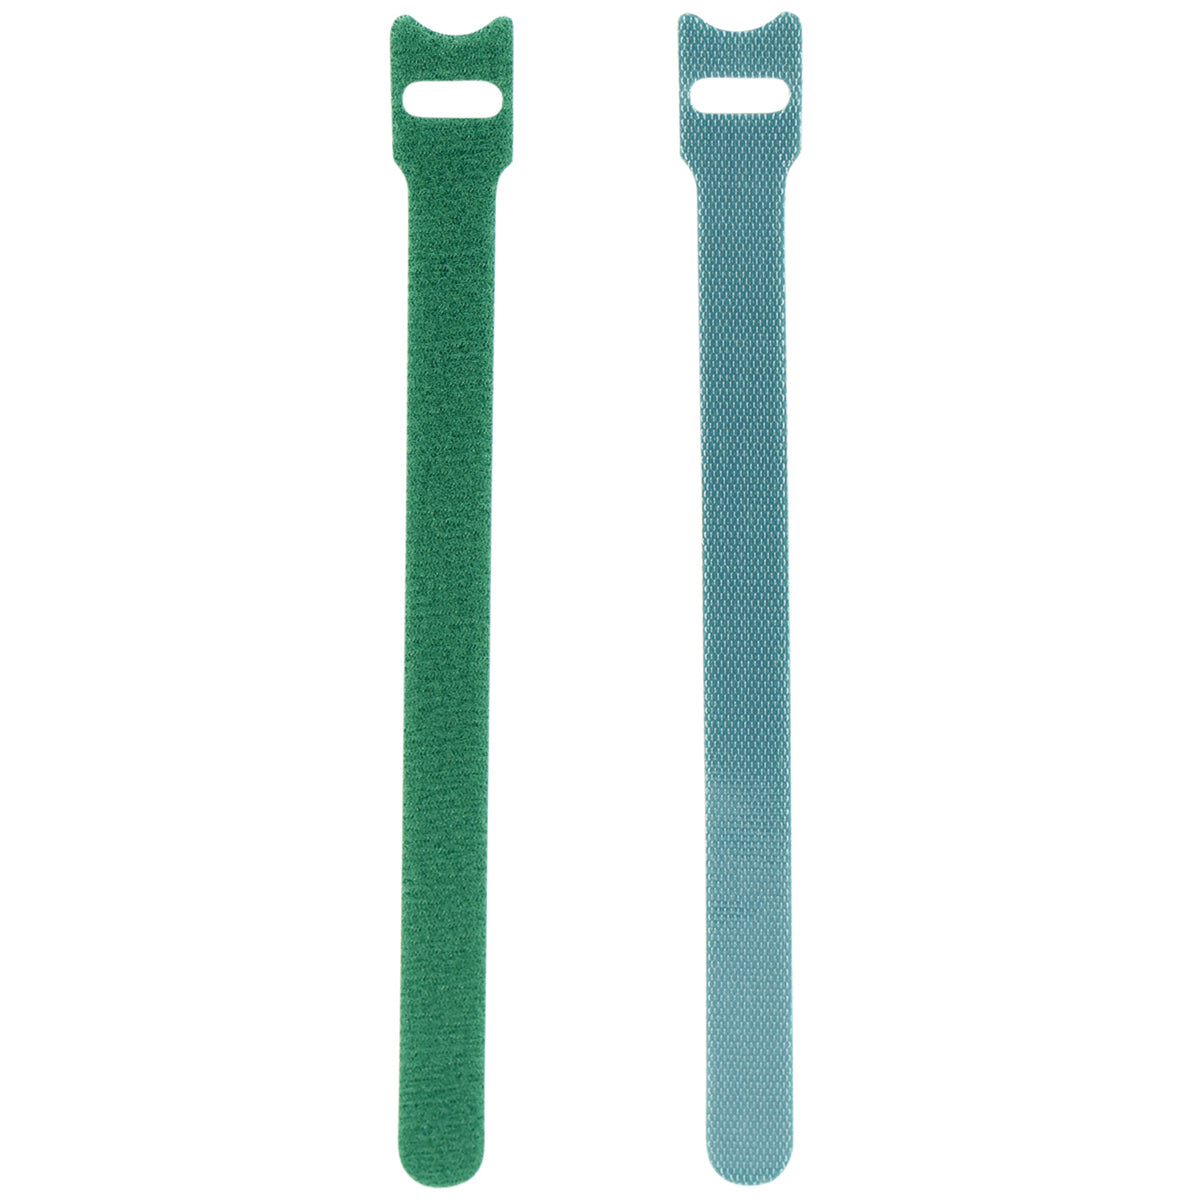 Displaying of two upright green nylon cable ties  